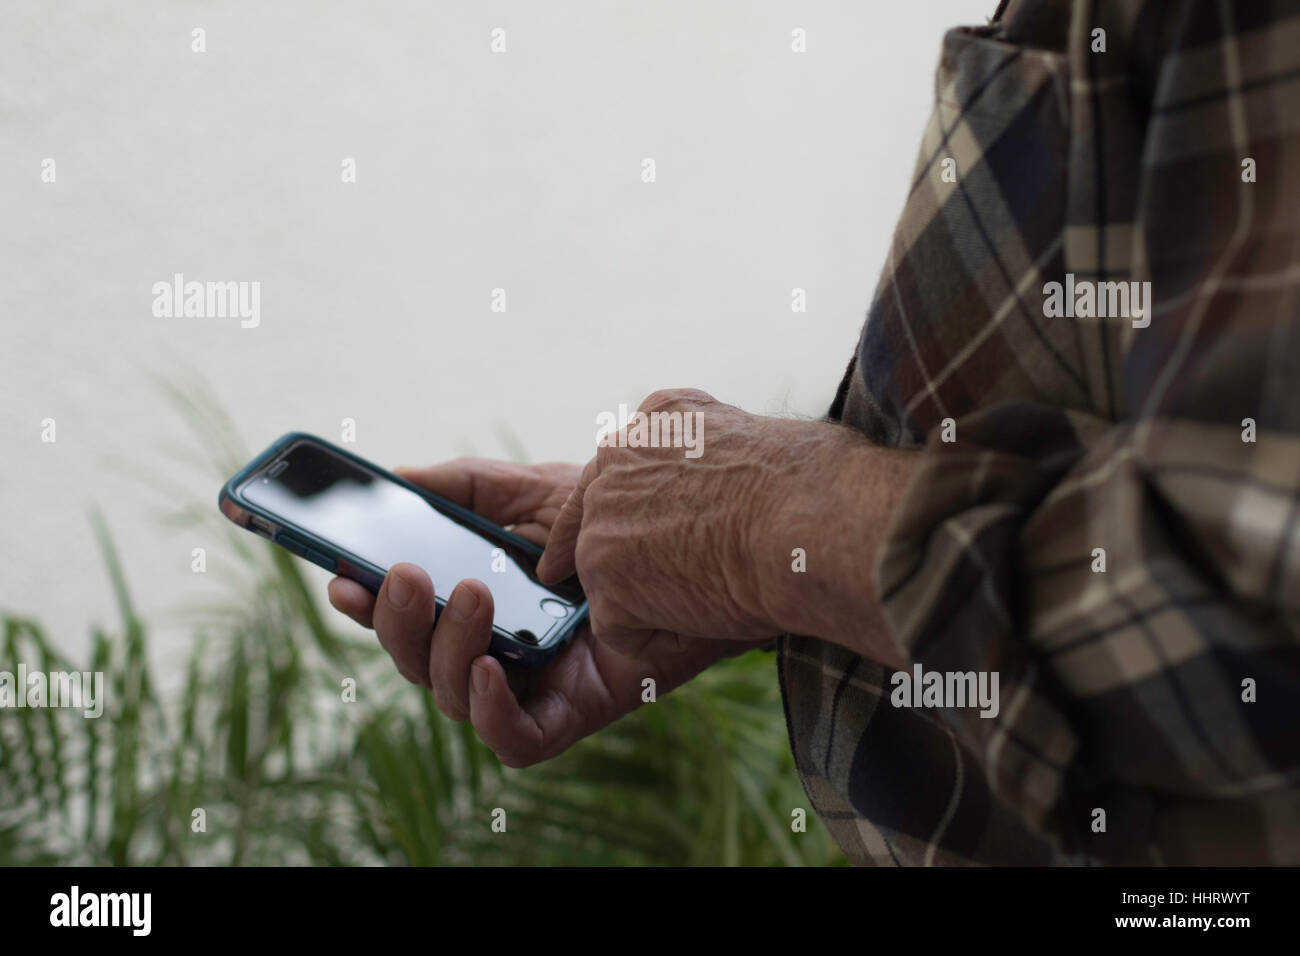 Man's hand holding cell phone in right hand standing outside over greens plants with negative space in upper left  background pointing to home button Stock Photo